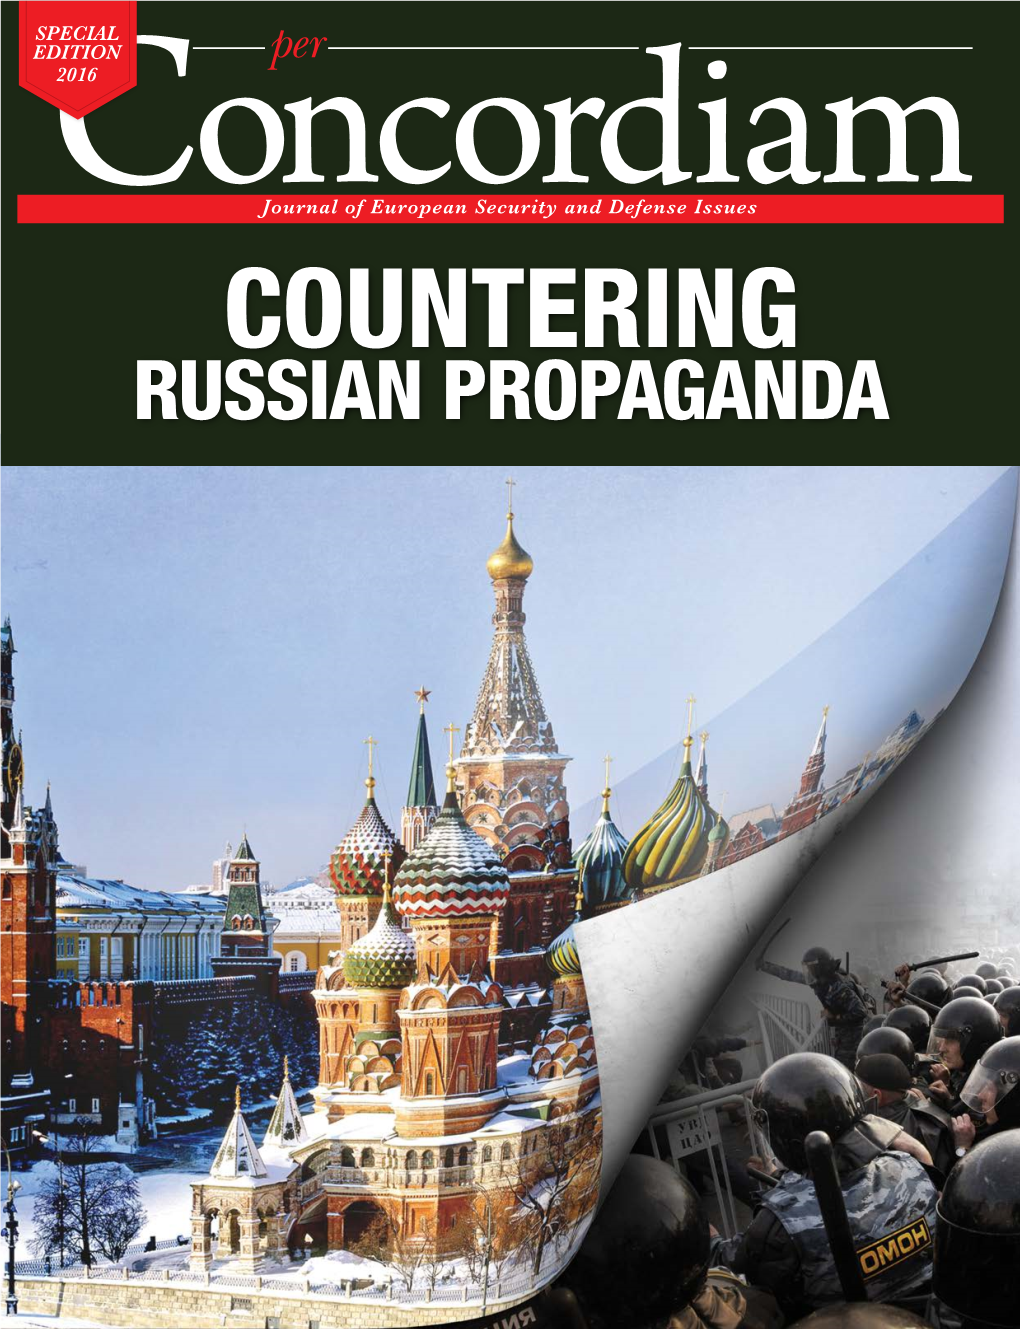 COUNTERING RUSSIAN PROPAGANDA SPECIAL EDITION 2016 Table of Contents Features